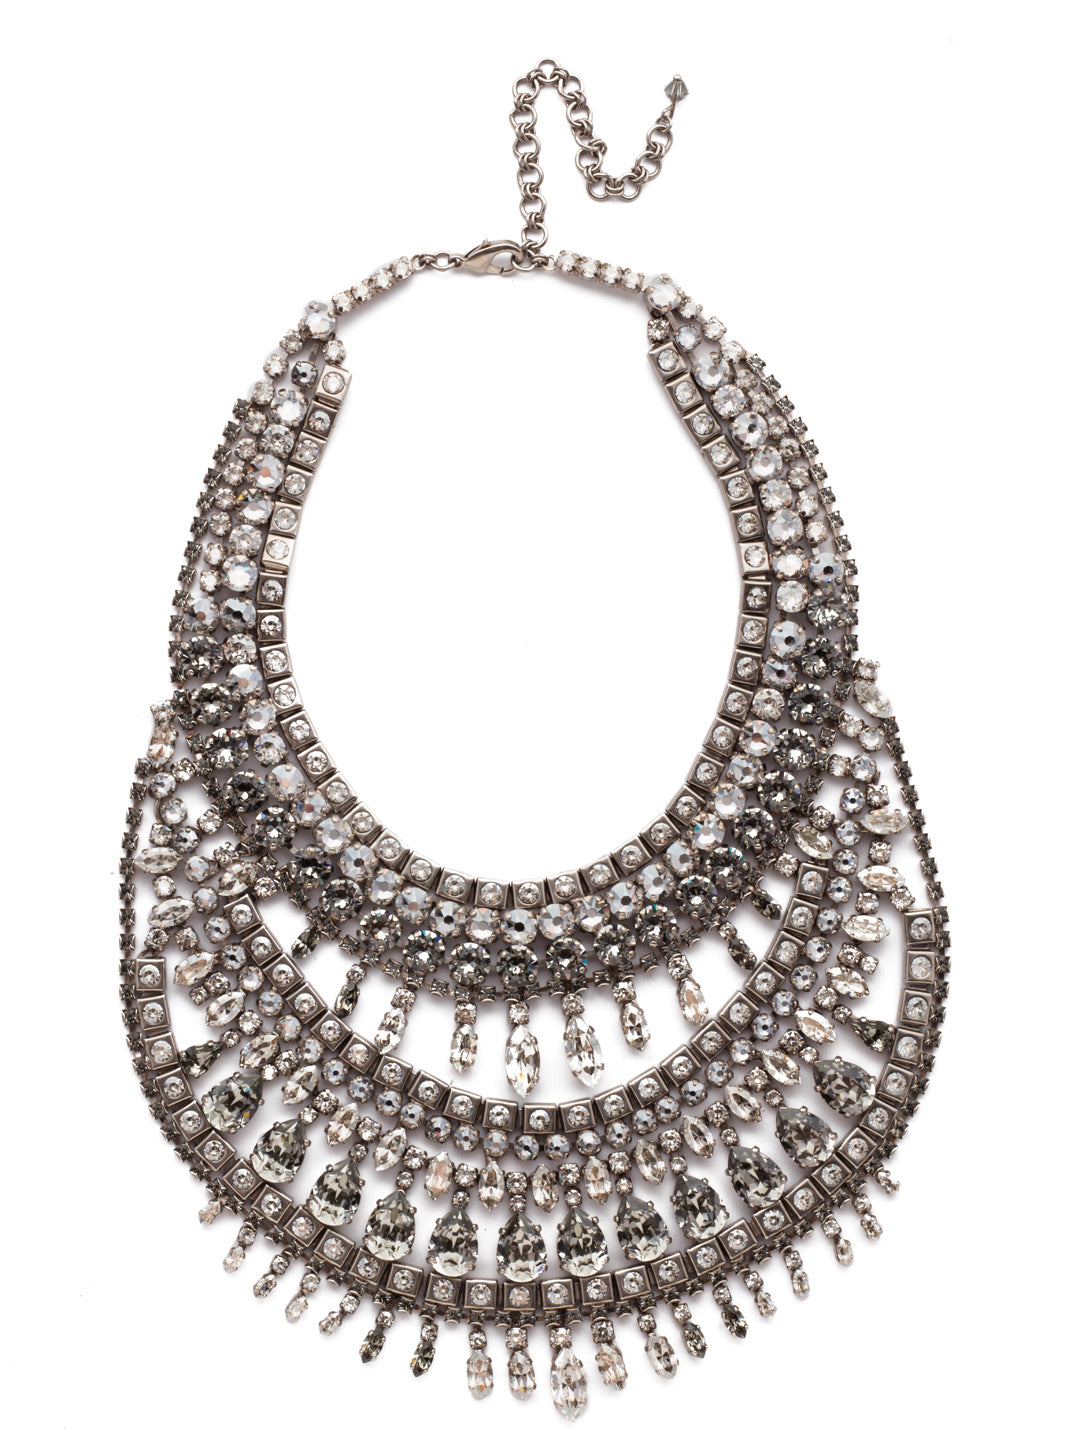 Silver Shade Statement Necklace - NSP6ASSSH - <p>Made purely with crystal, this necklace is layered in high-end, classic elegance. True to the Avant Garde collection, the Sorrelli Crystal Necklace is a work of art. Not for the faint of heart, prepare to be the center of attention whenever you decide to take this piece on a night out. From Sorrelli's Silver Shade collection in our Antique Silver-tone finish.</p>